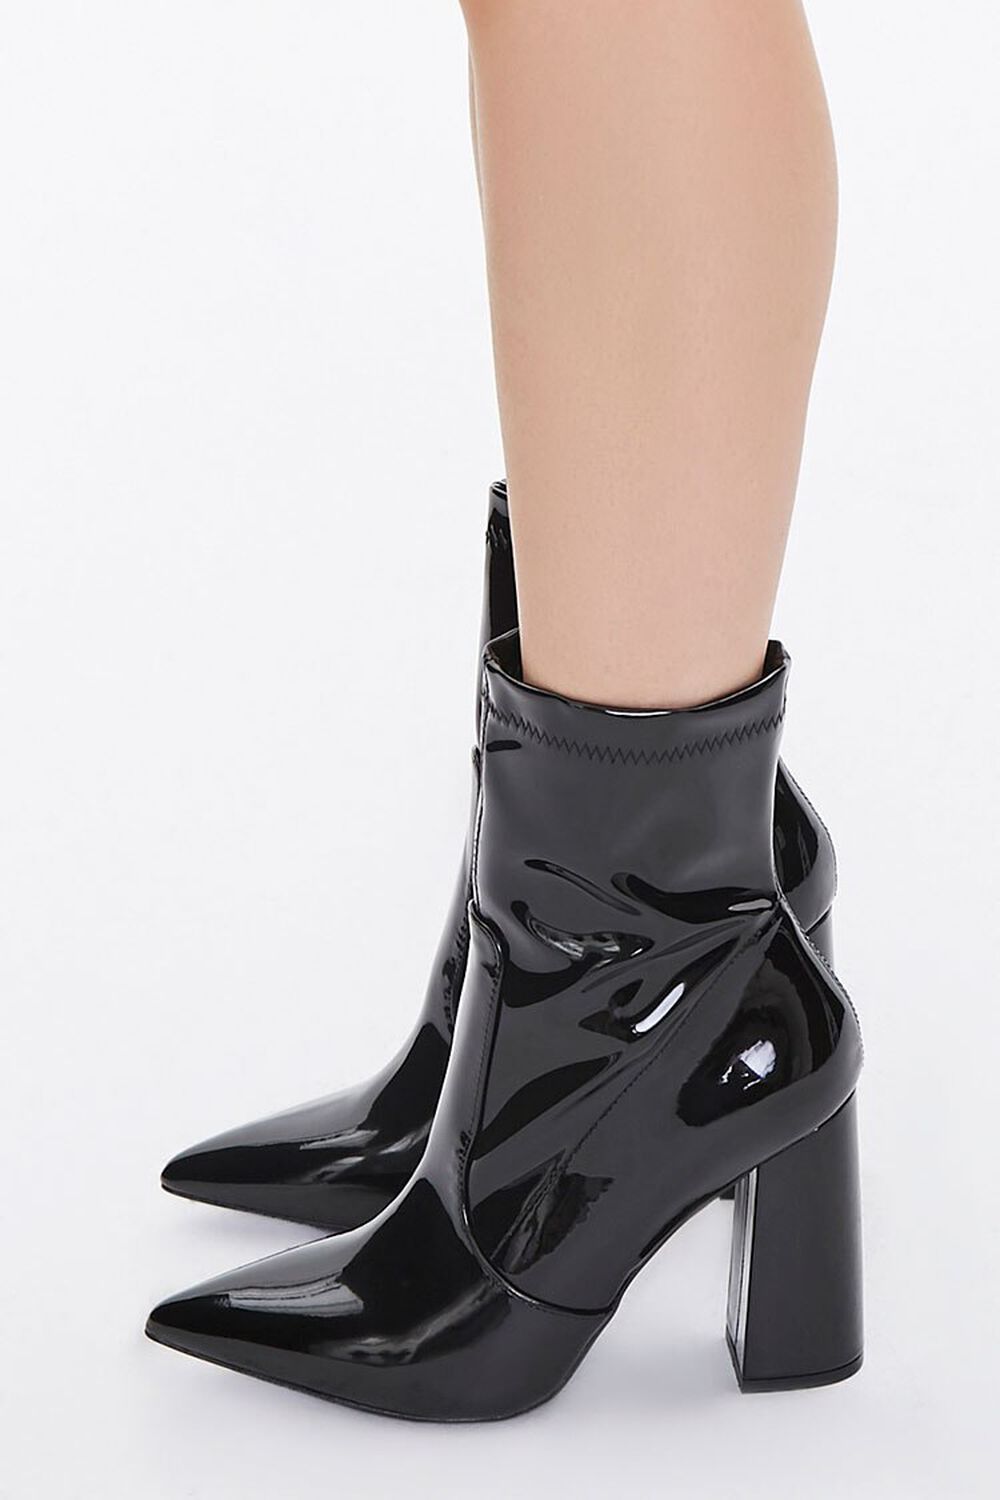 Faux Patent Leather Sock Booties, image 2